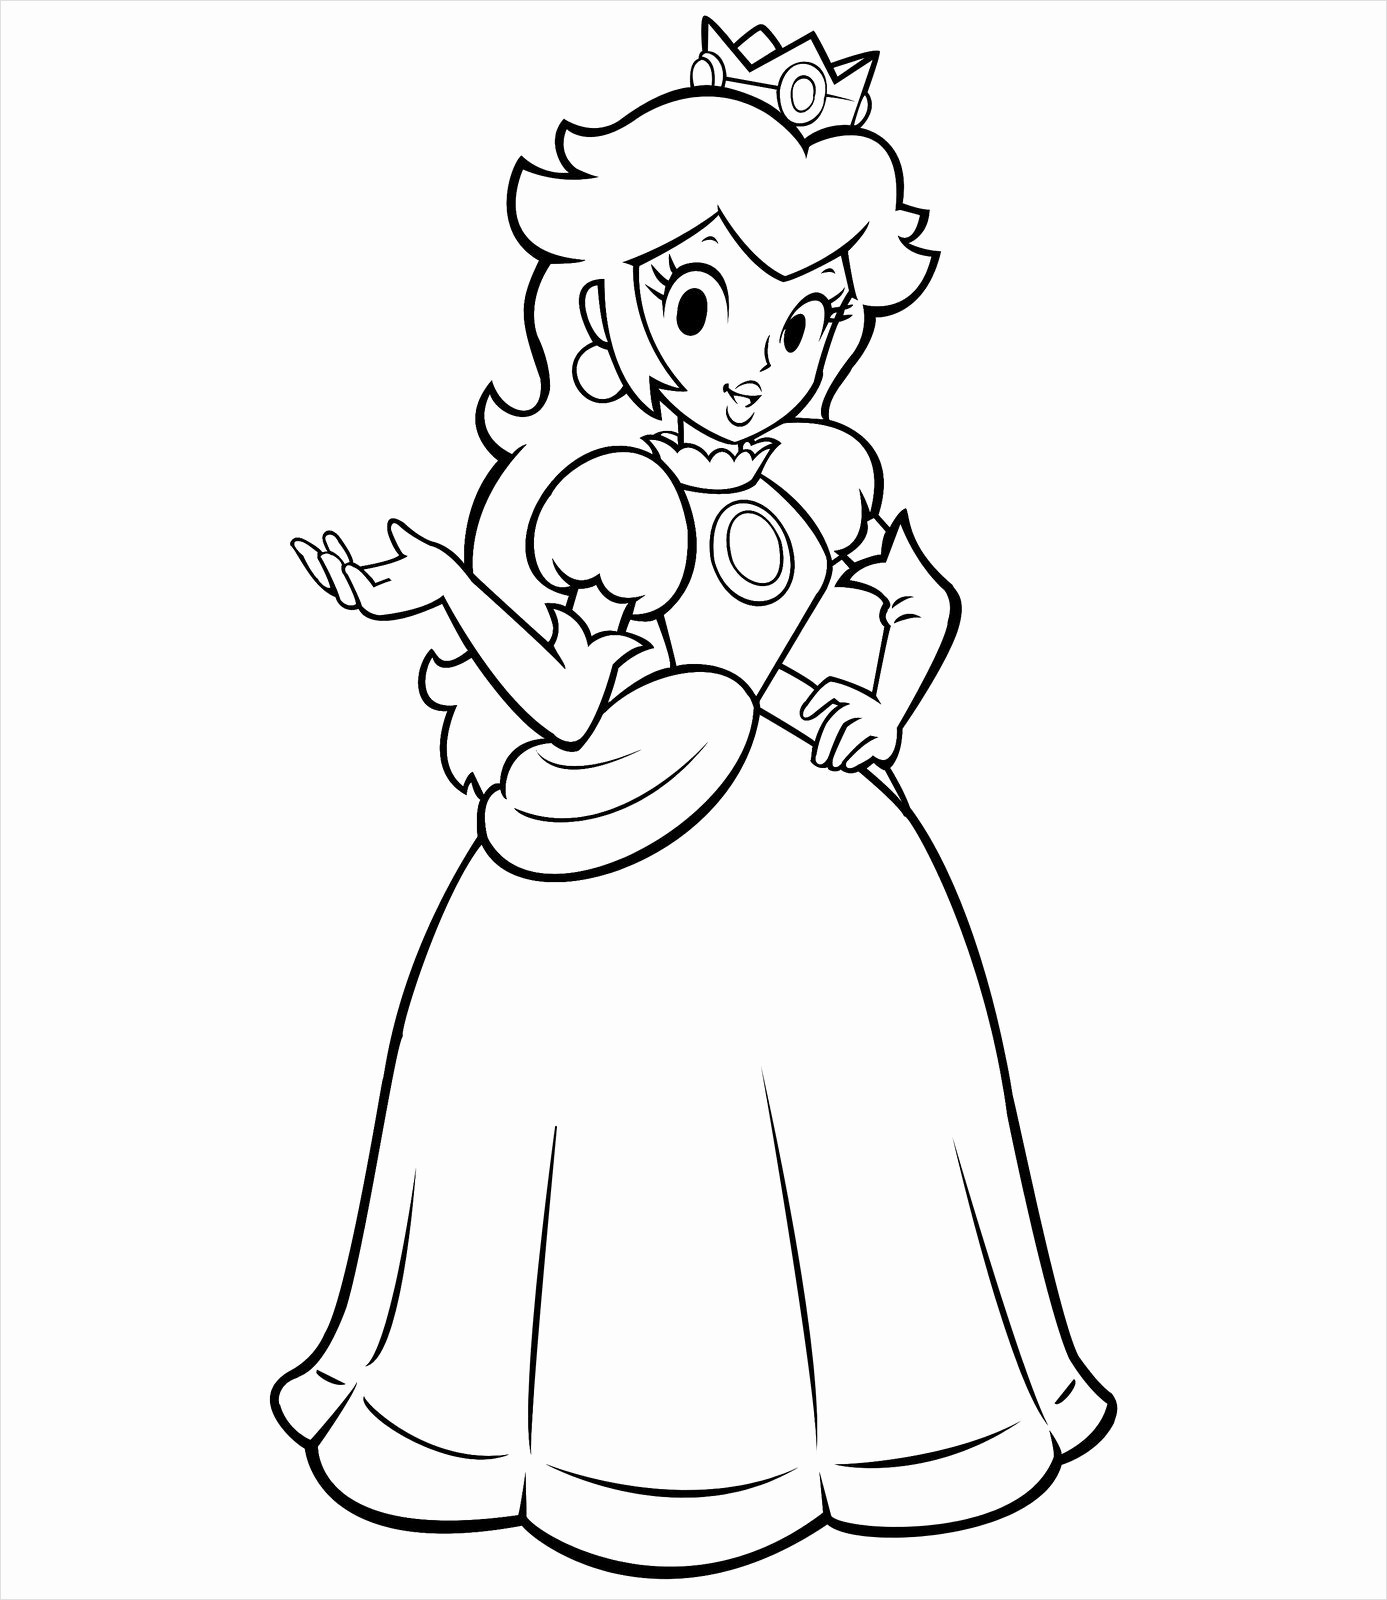 Coloring Pages Of Princess Peach and Princess Daisy Wallpaper